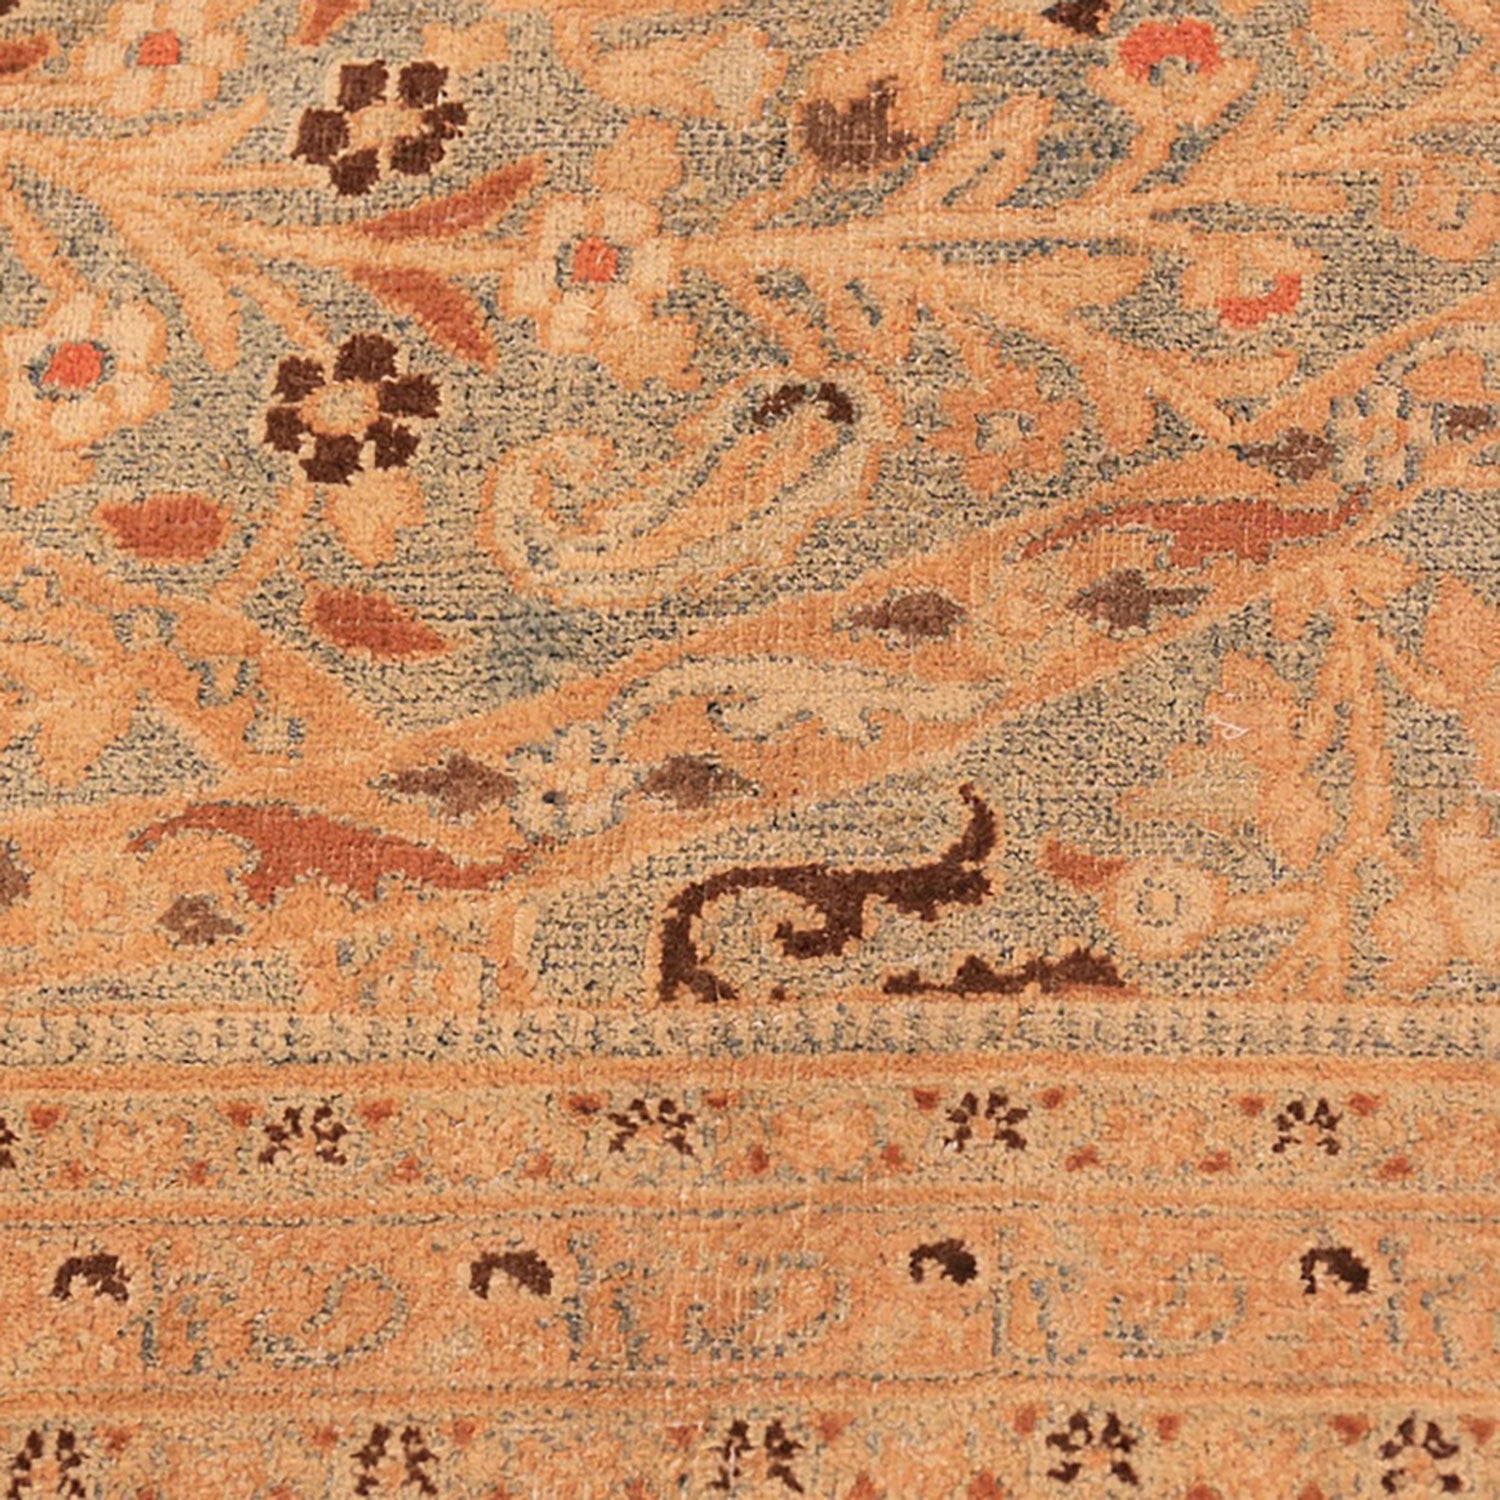 Close-up of a vintage rug with detailed floral motifs.